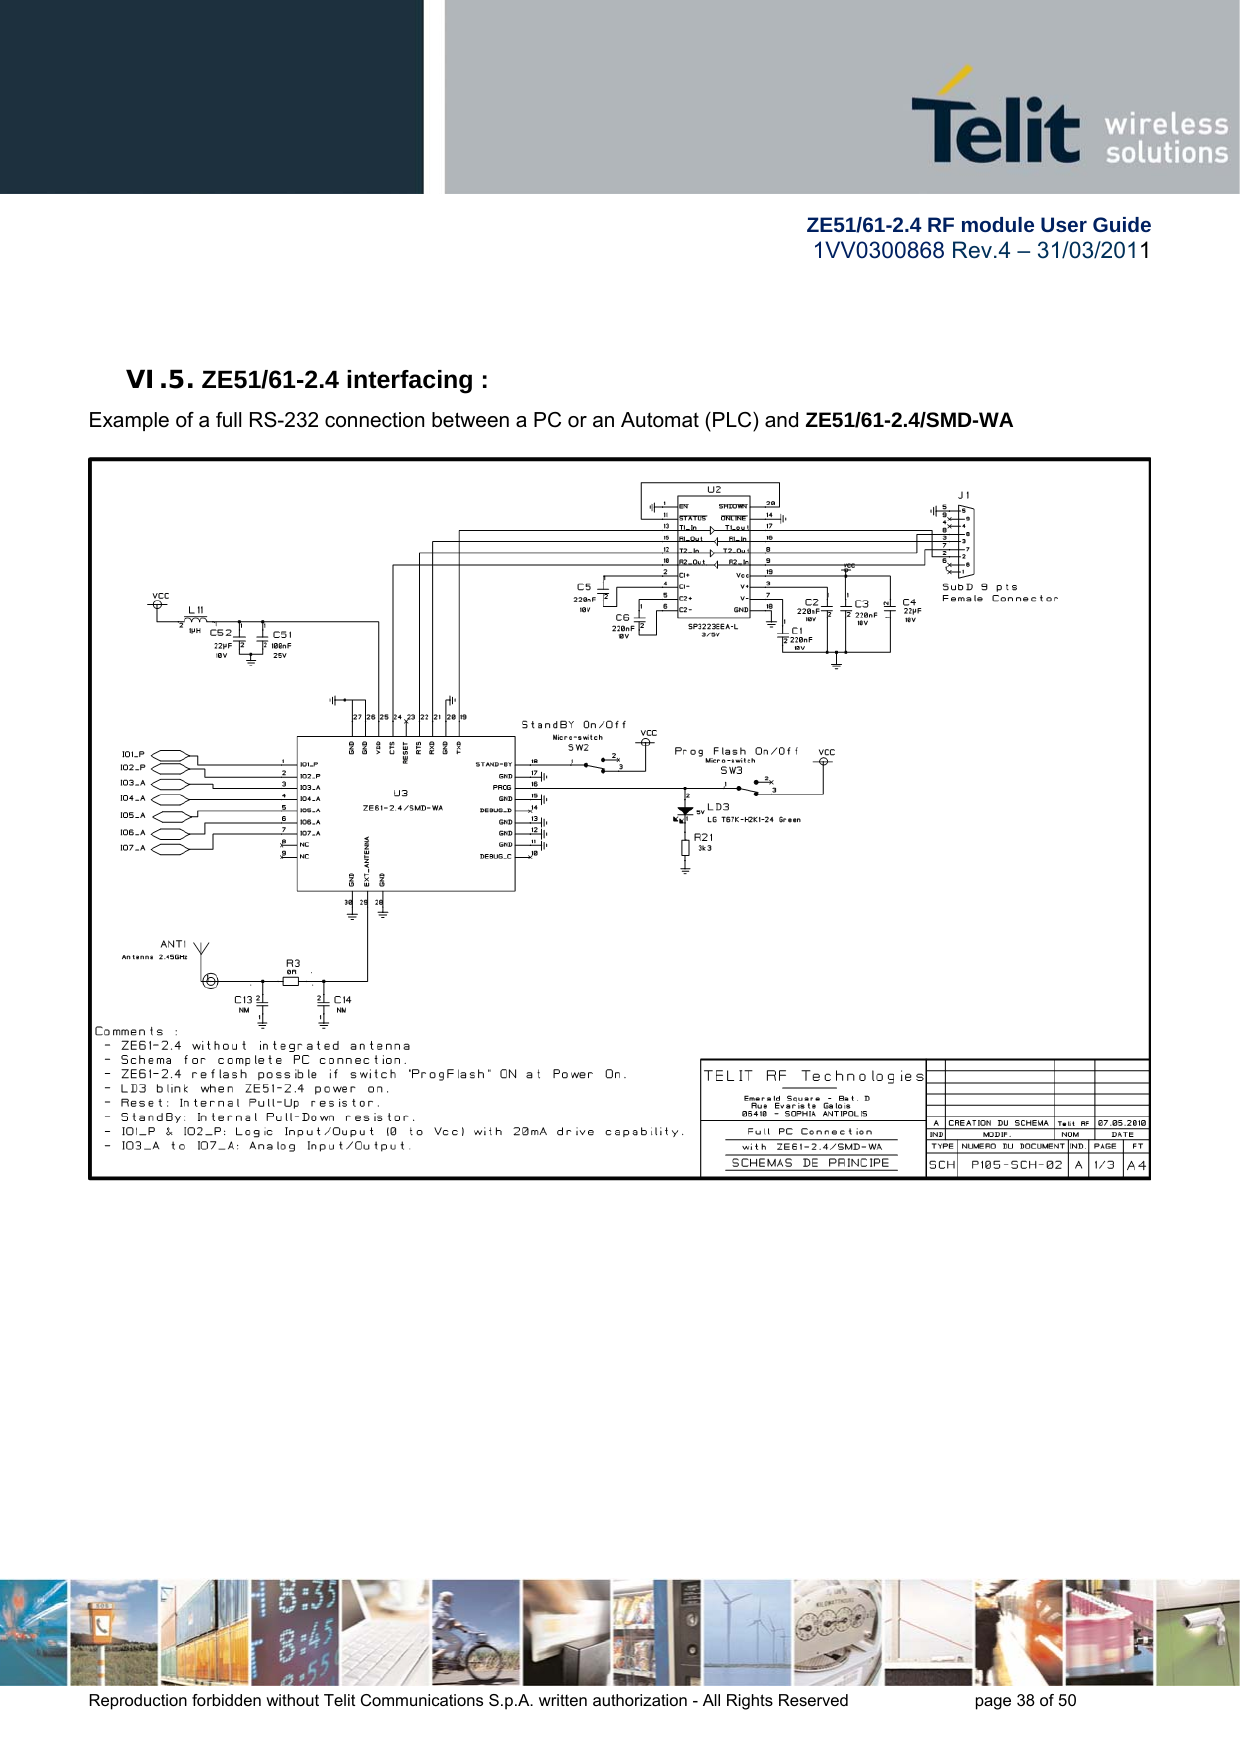         ZE51/61-2.4 RF module User Guide 1VV0300868 Rev.4 – 31/03/2011 Reproduction forbidden without Telit Communications S.p.A. written authorization - All Rights Reserved    page 38 of 50  VI.5. ZE51/61-2.4 interfacing : Example of a full RS-232 connection between a PC or an Automat (PLC) and ZE51/61-2.4/SMD-WA   